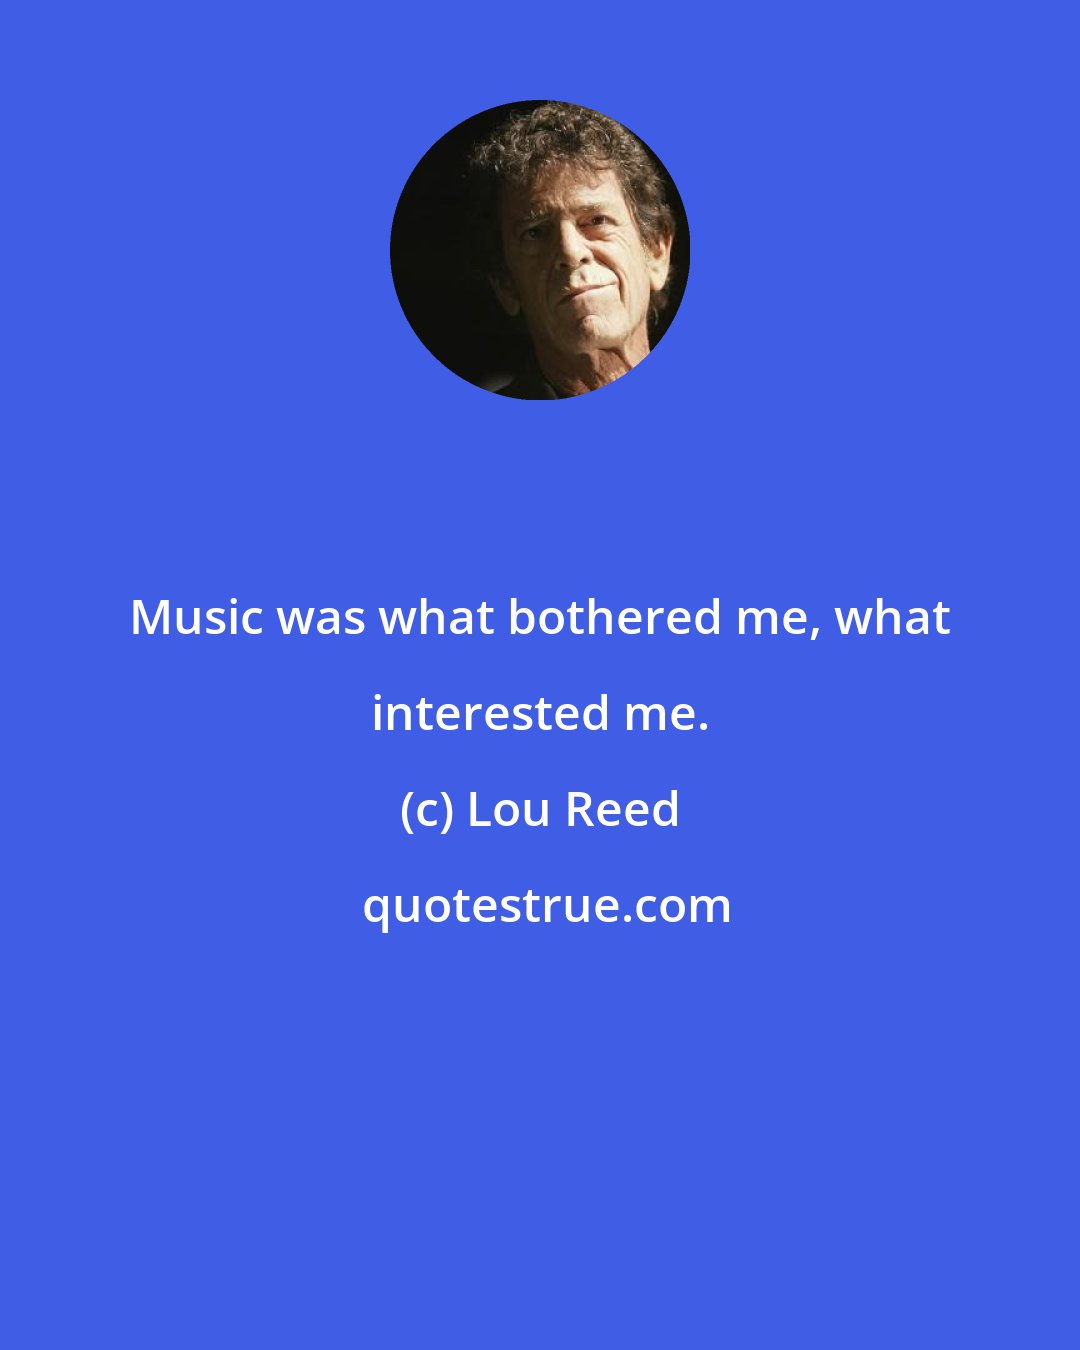 Lou Reed: Music was what bothered me, what interested me.